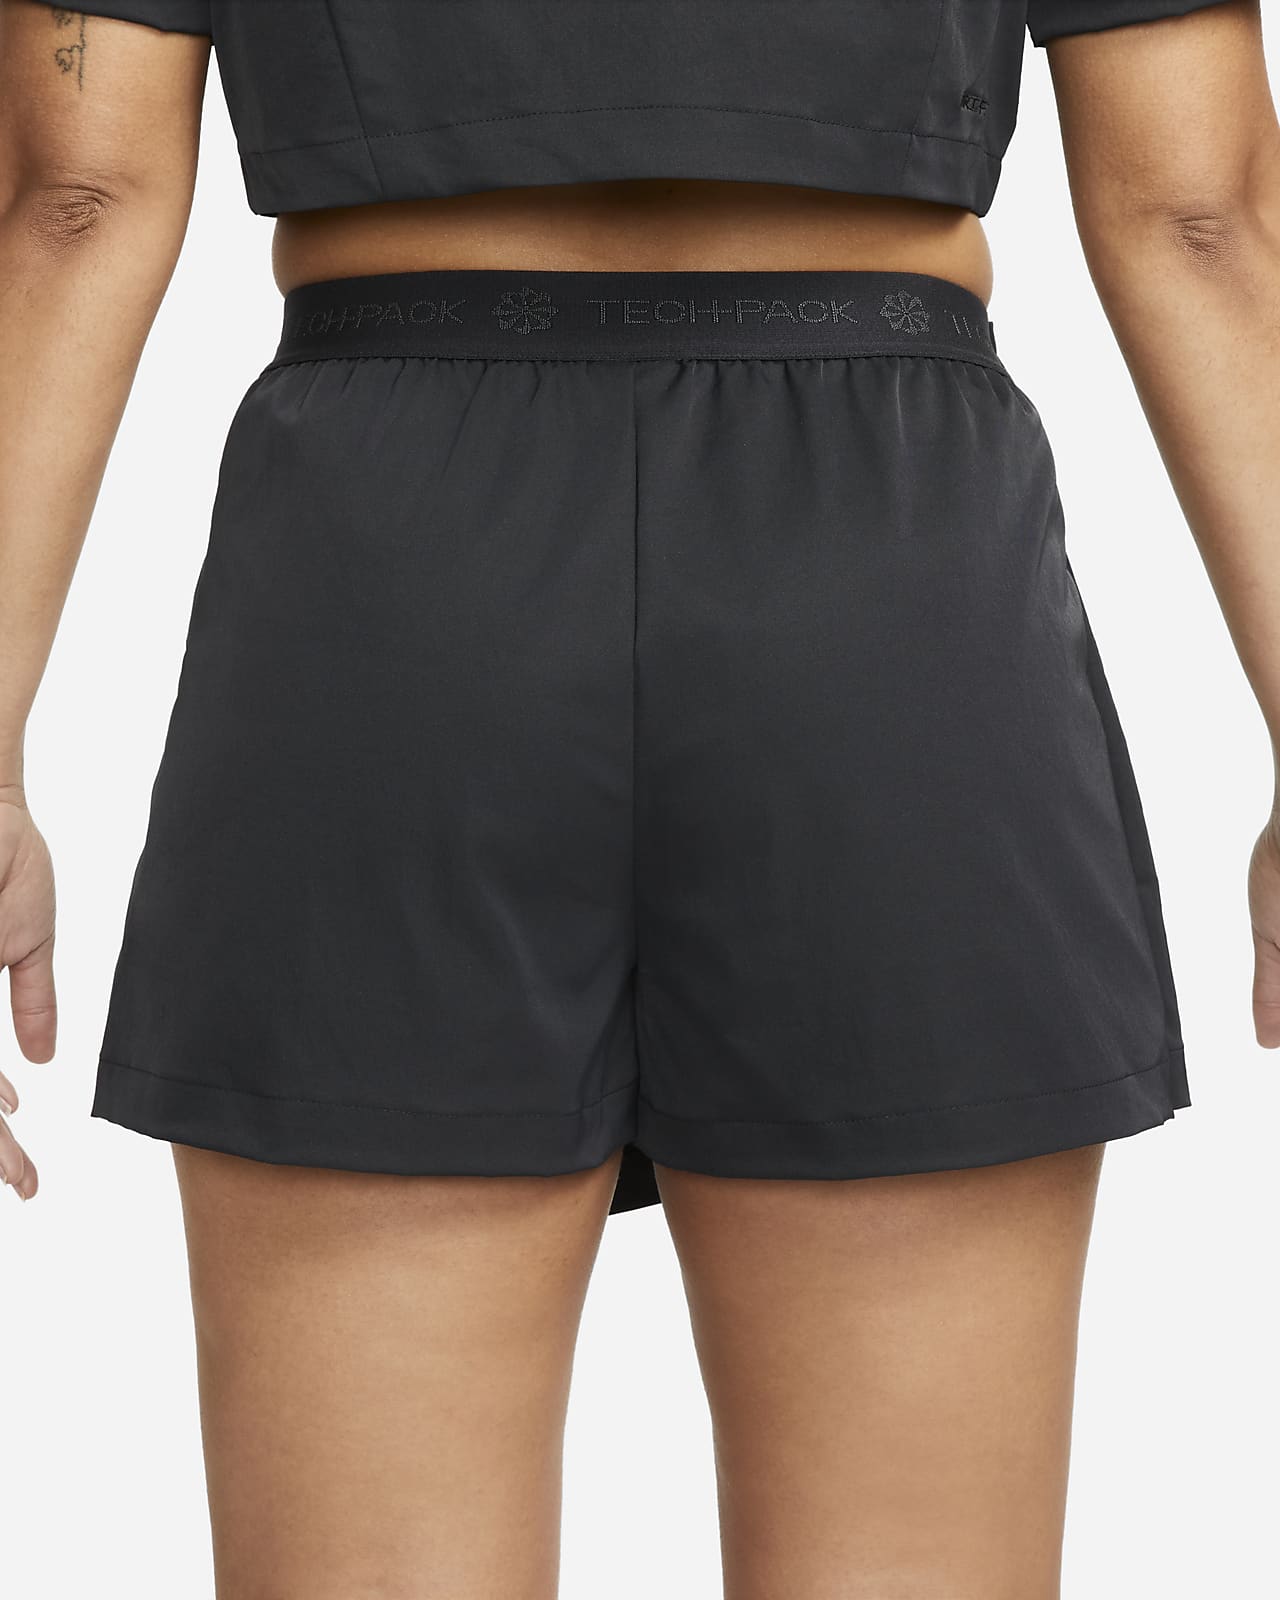 NWT Womens Plus 3X TEK GEAR high rise fitted shorts Black wicking pockets